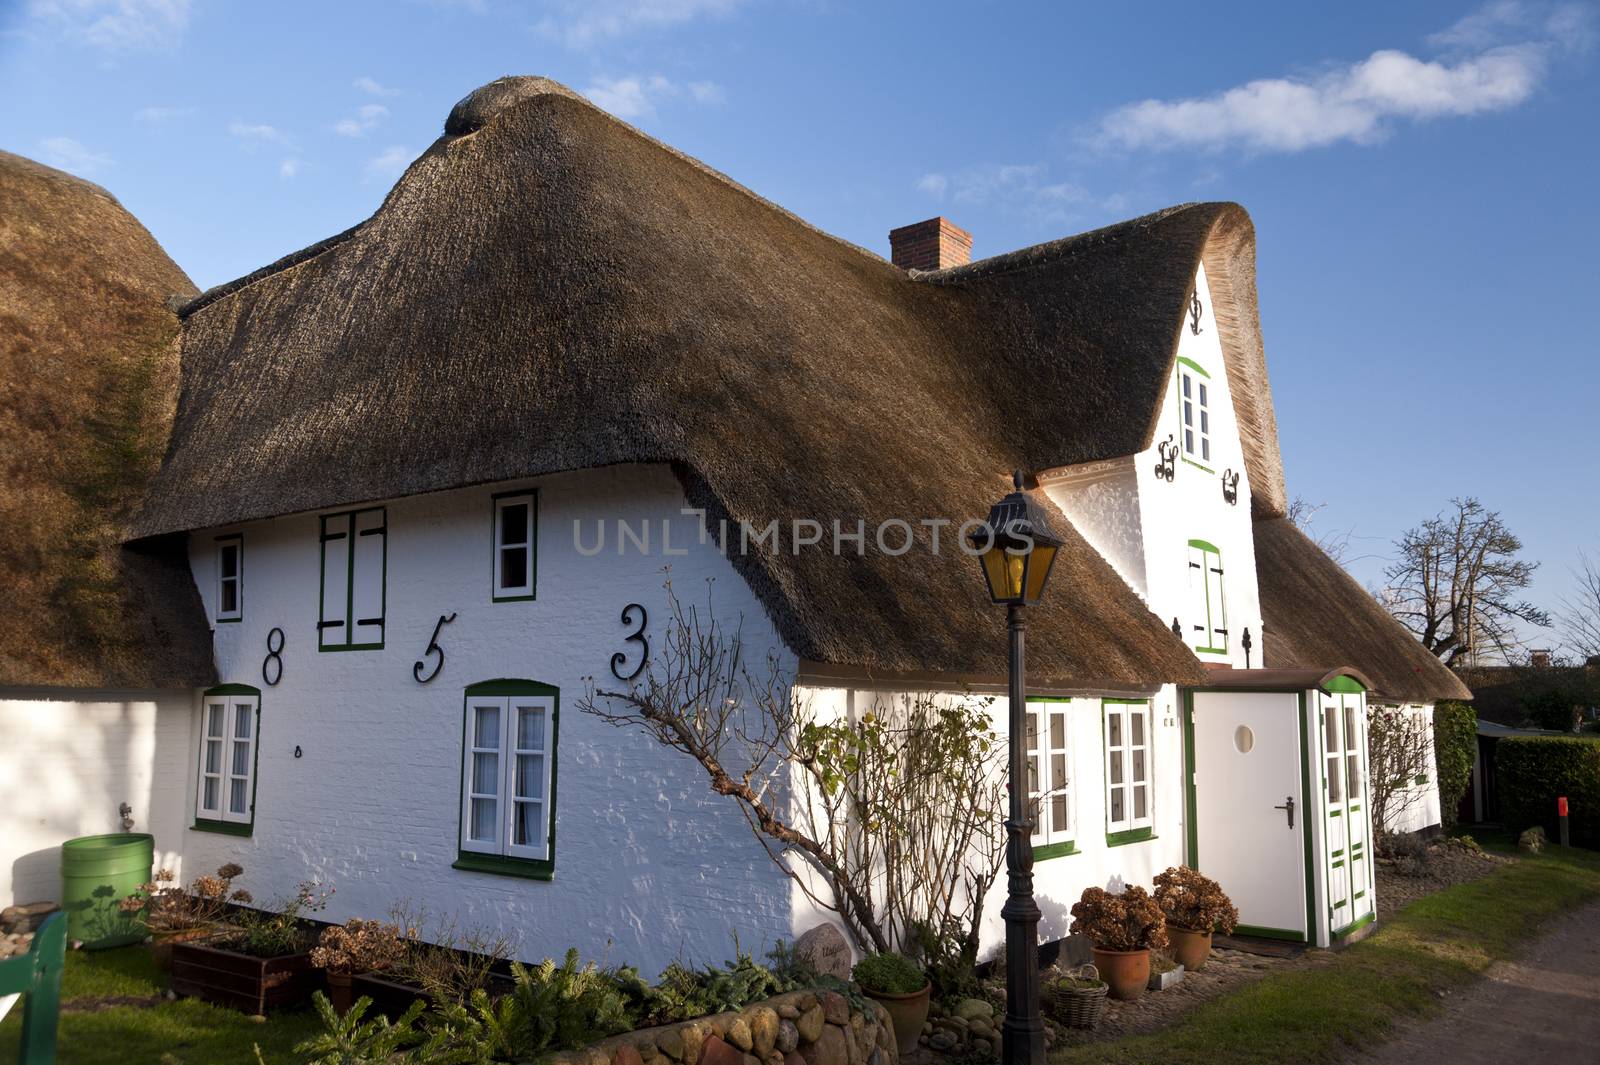 Thatched Roof House on Amrum in Germany